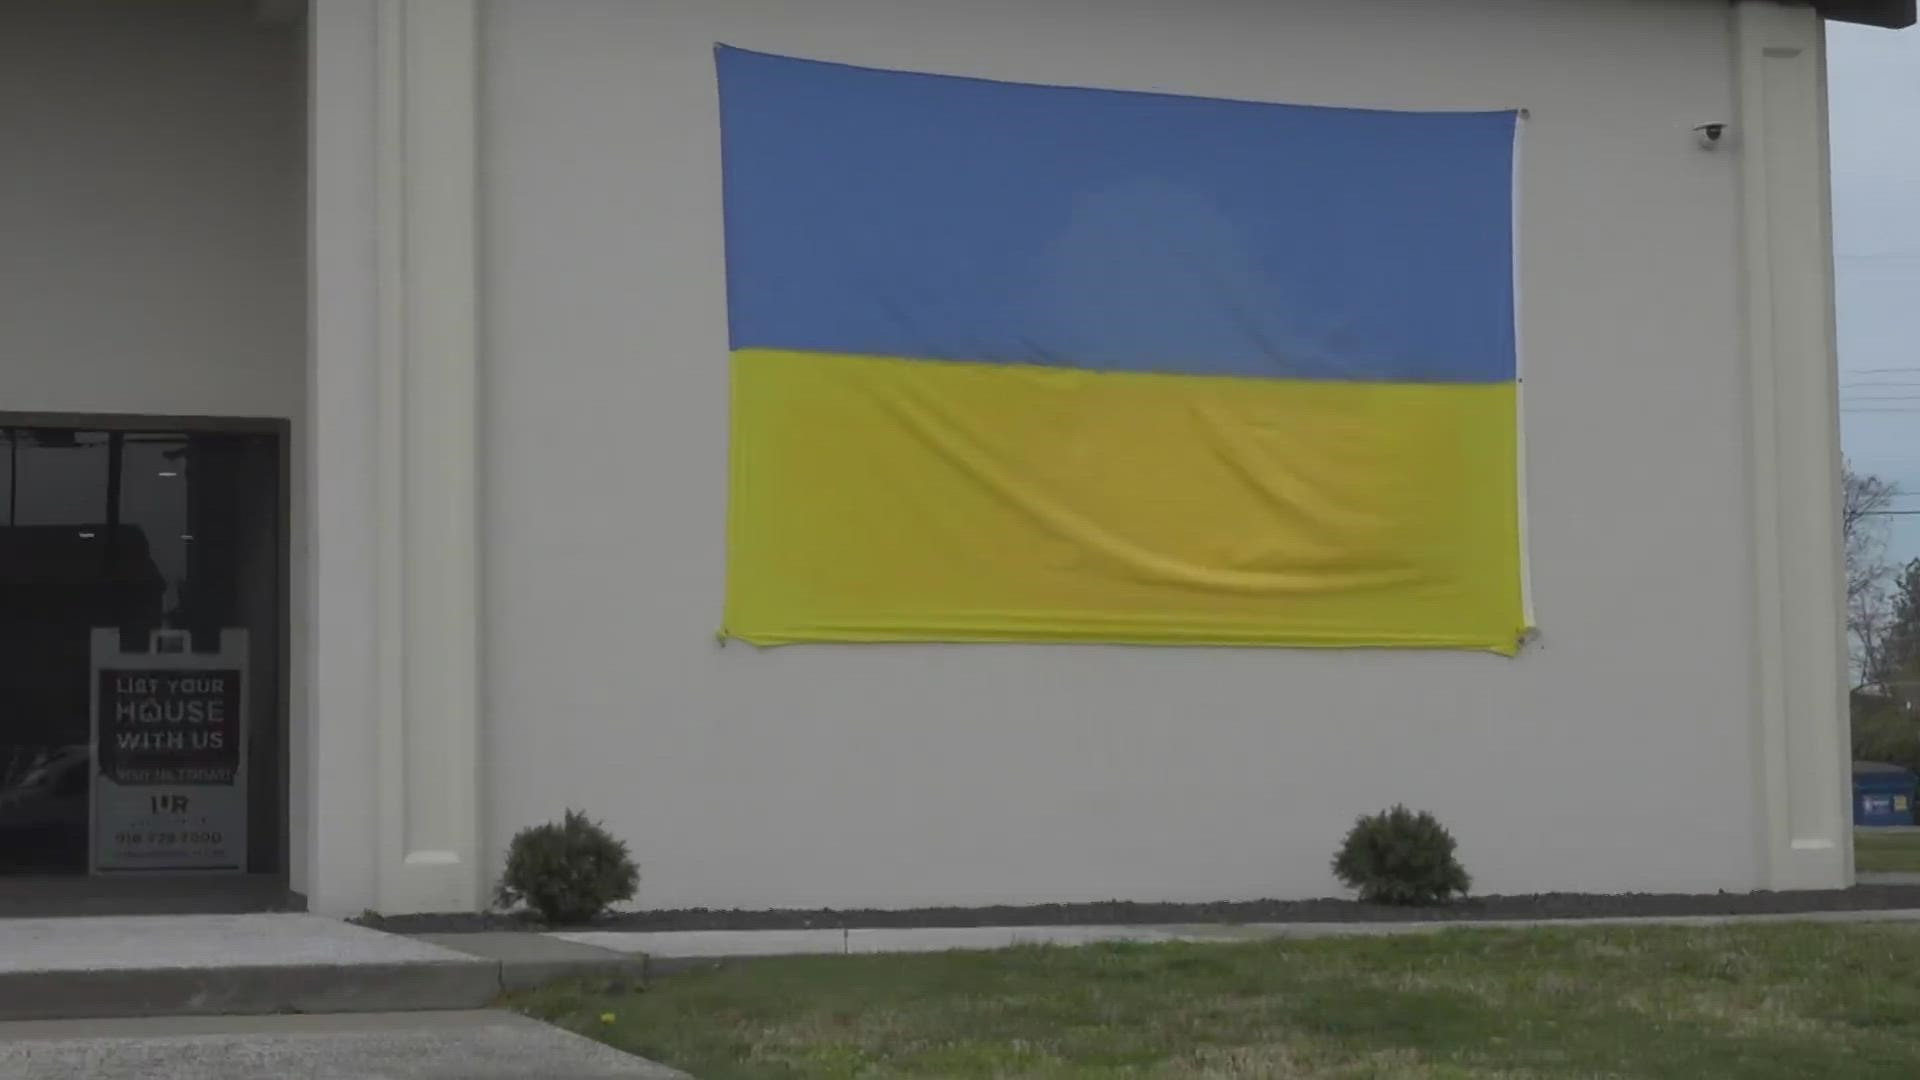 Vlad Skots with the Ukrainian American house in Sacramento County said their flag was vandalized with a swastika.